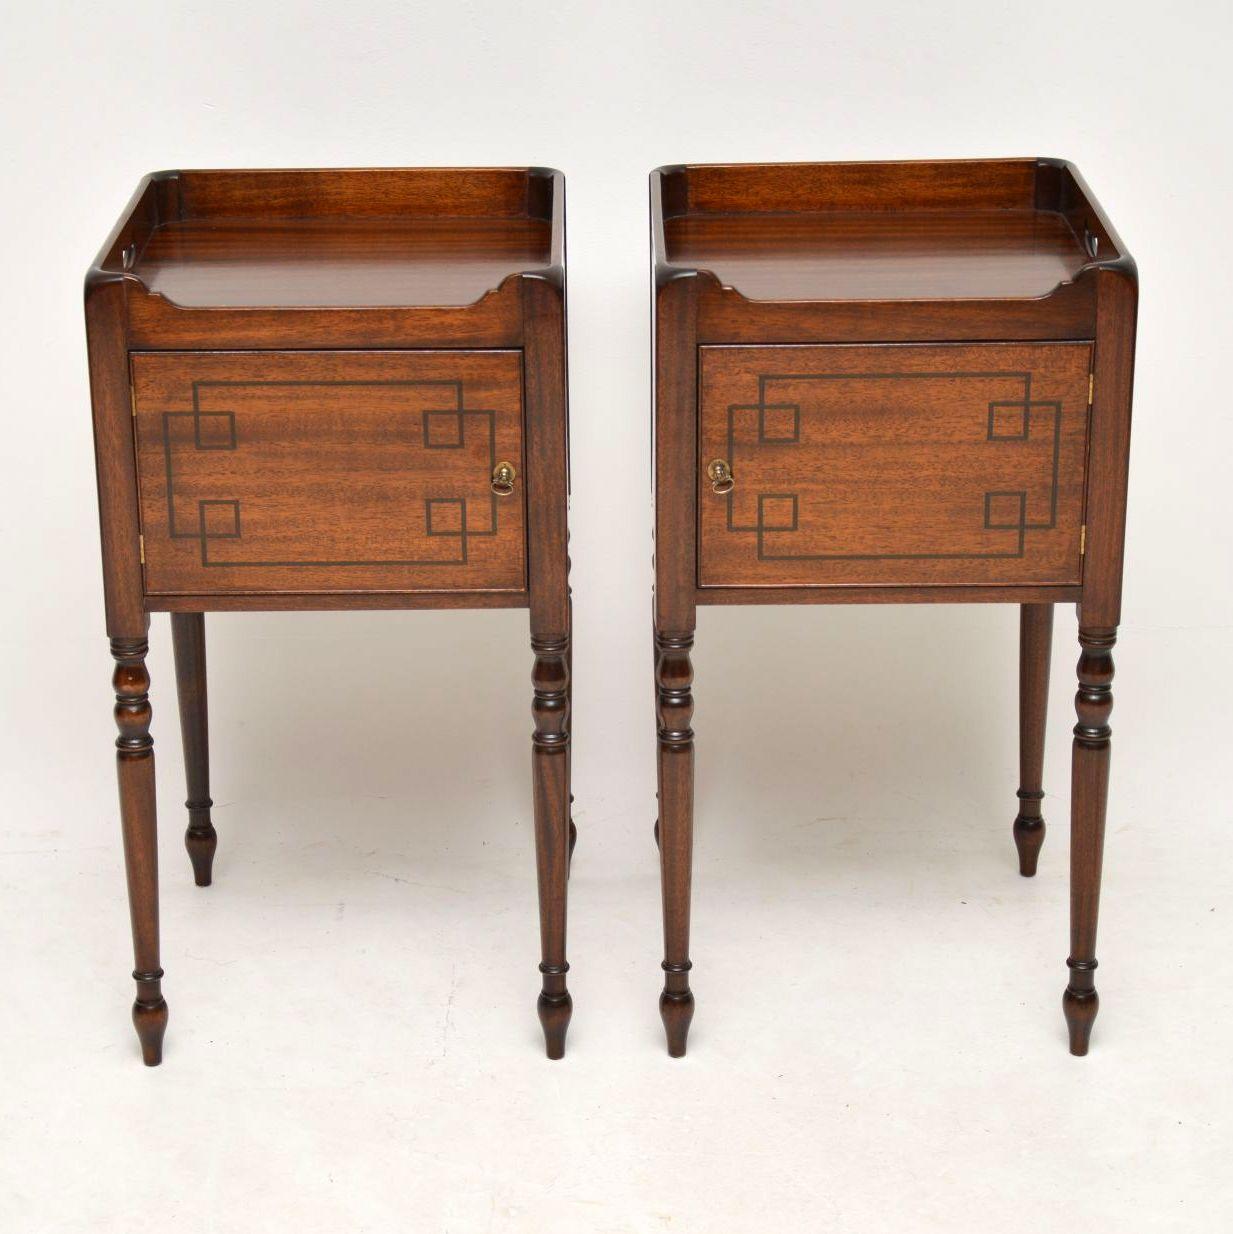 Pair of fine quality mahogany bedside cabinets in the antique Georgian style with ebony inlays on the doors. I think they date from around the 1950s-1960s period, however they certainly have a good period look and are very well made. They have tray